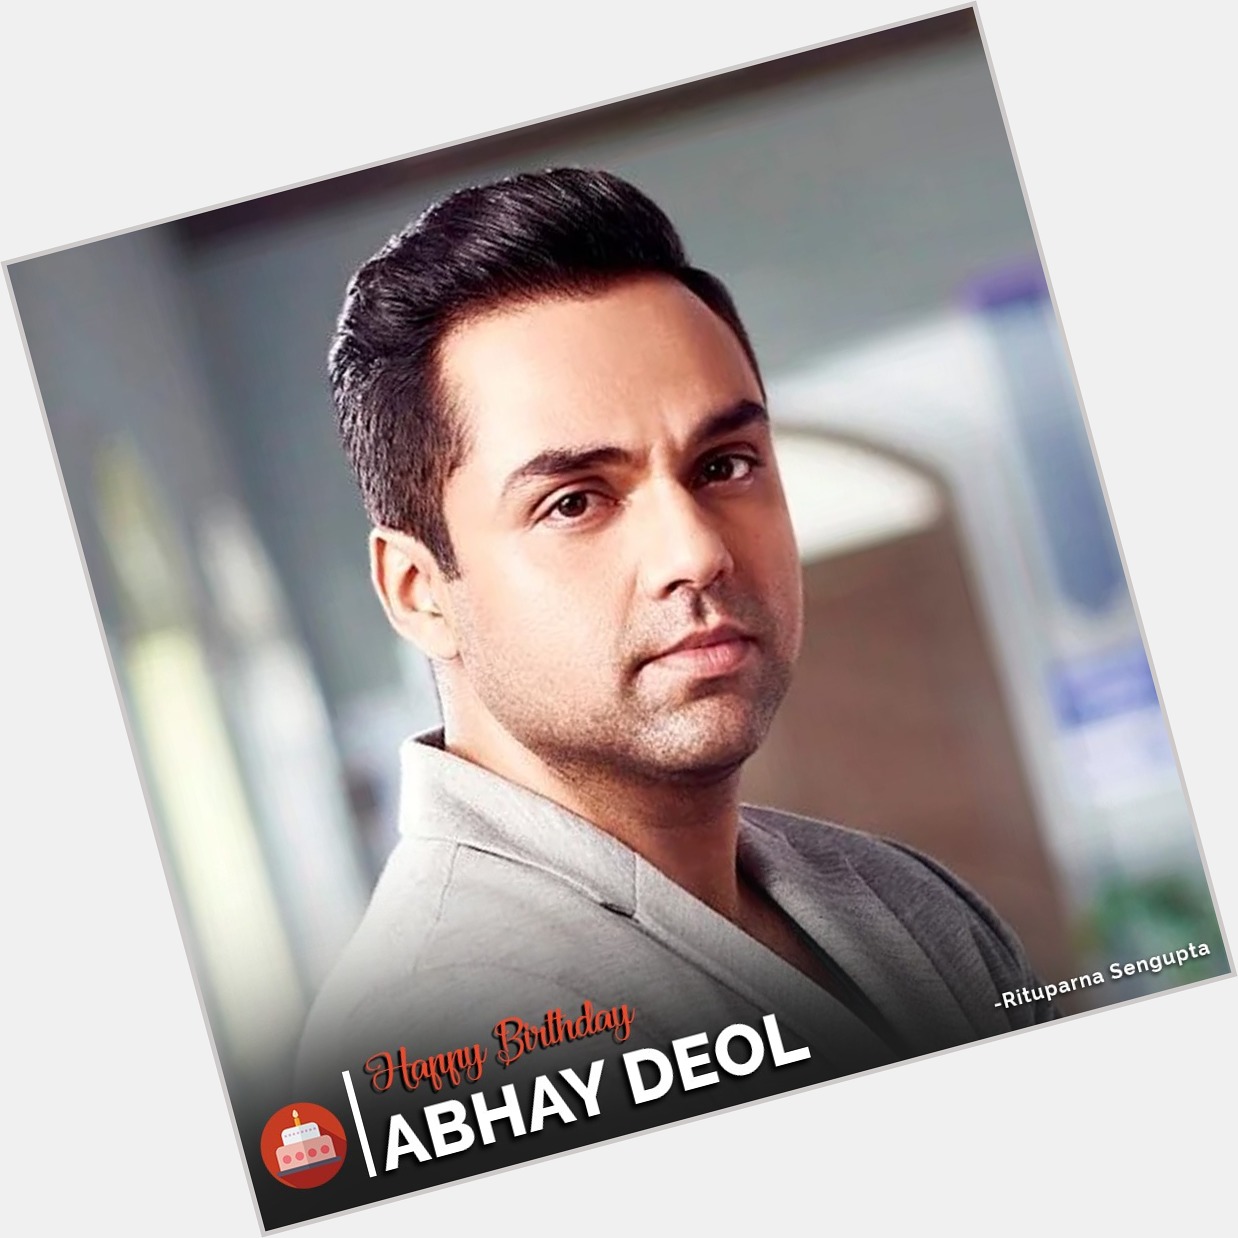   Wishing a very happy birthday to the very versatile actor, Abhay Deol!   